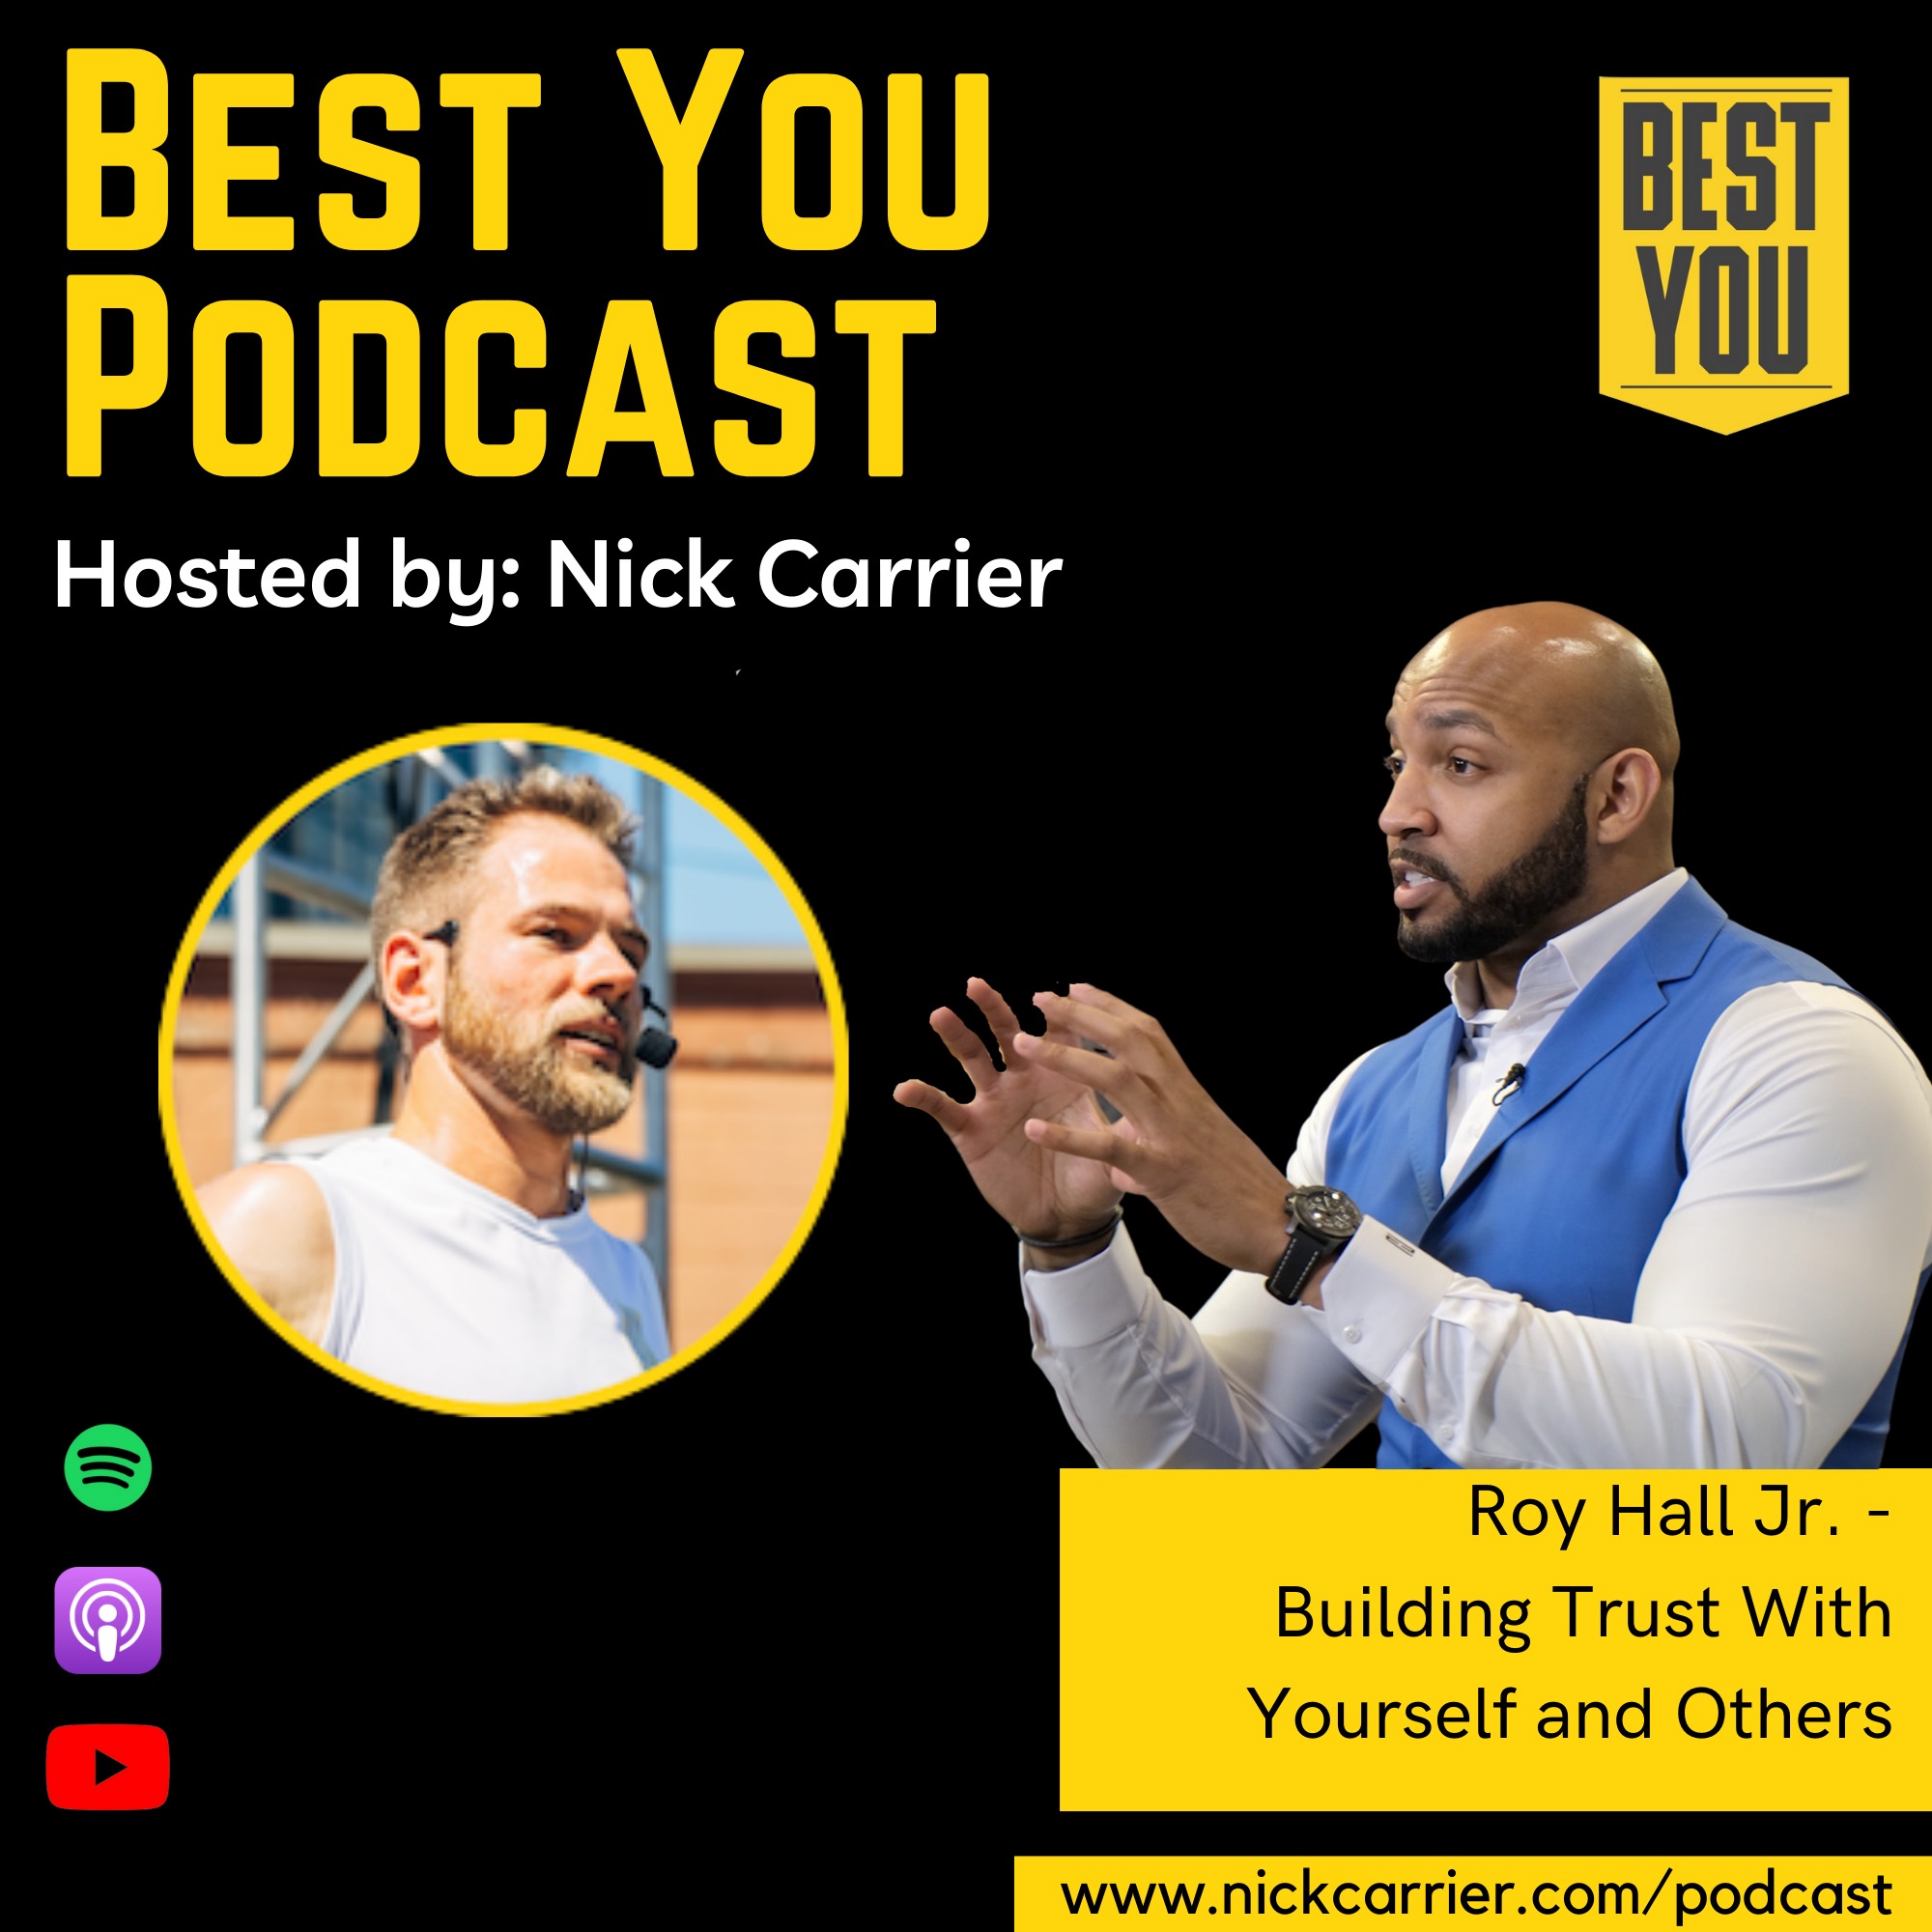 Roy Hall Jr. - Building Trust With Yourself and Others